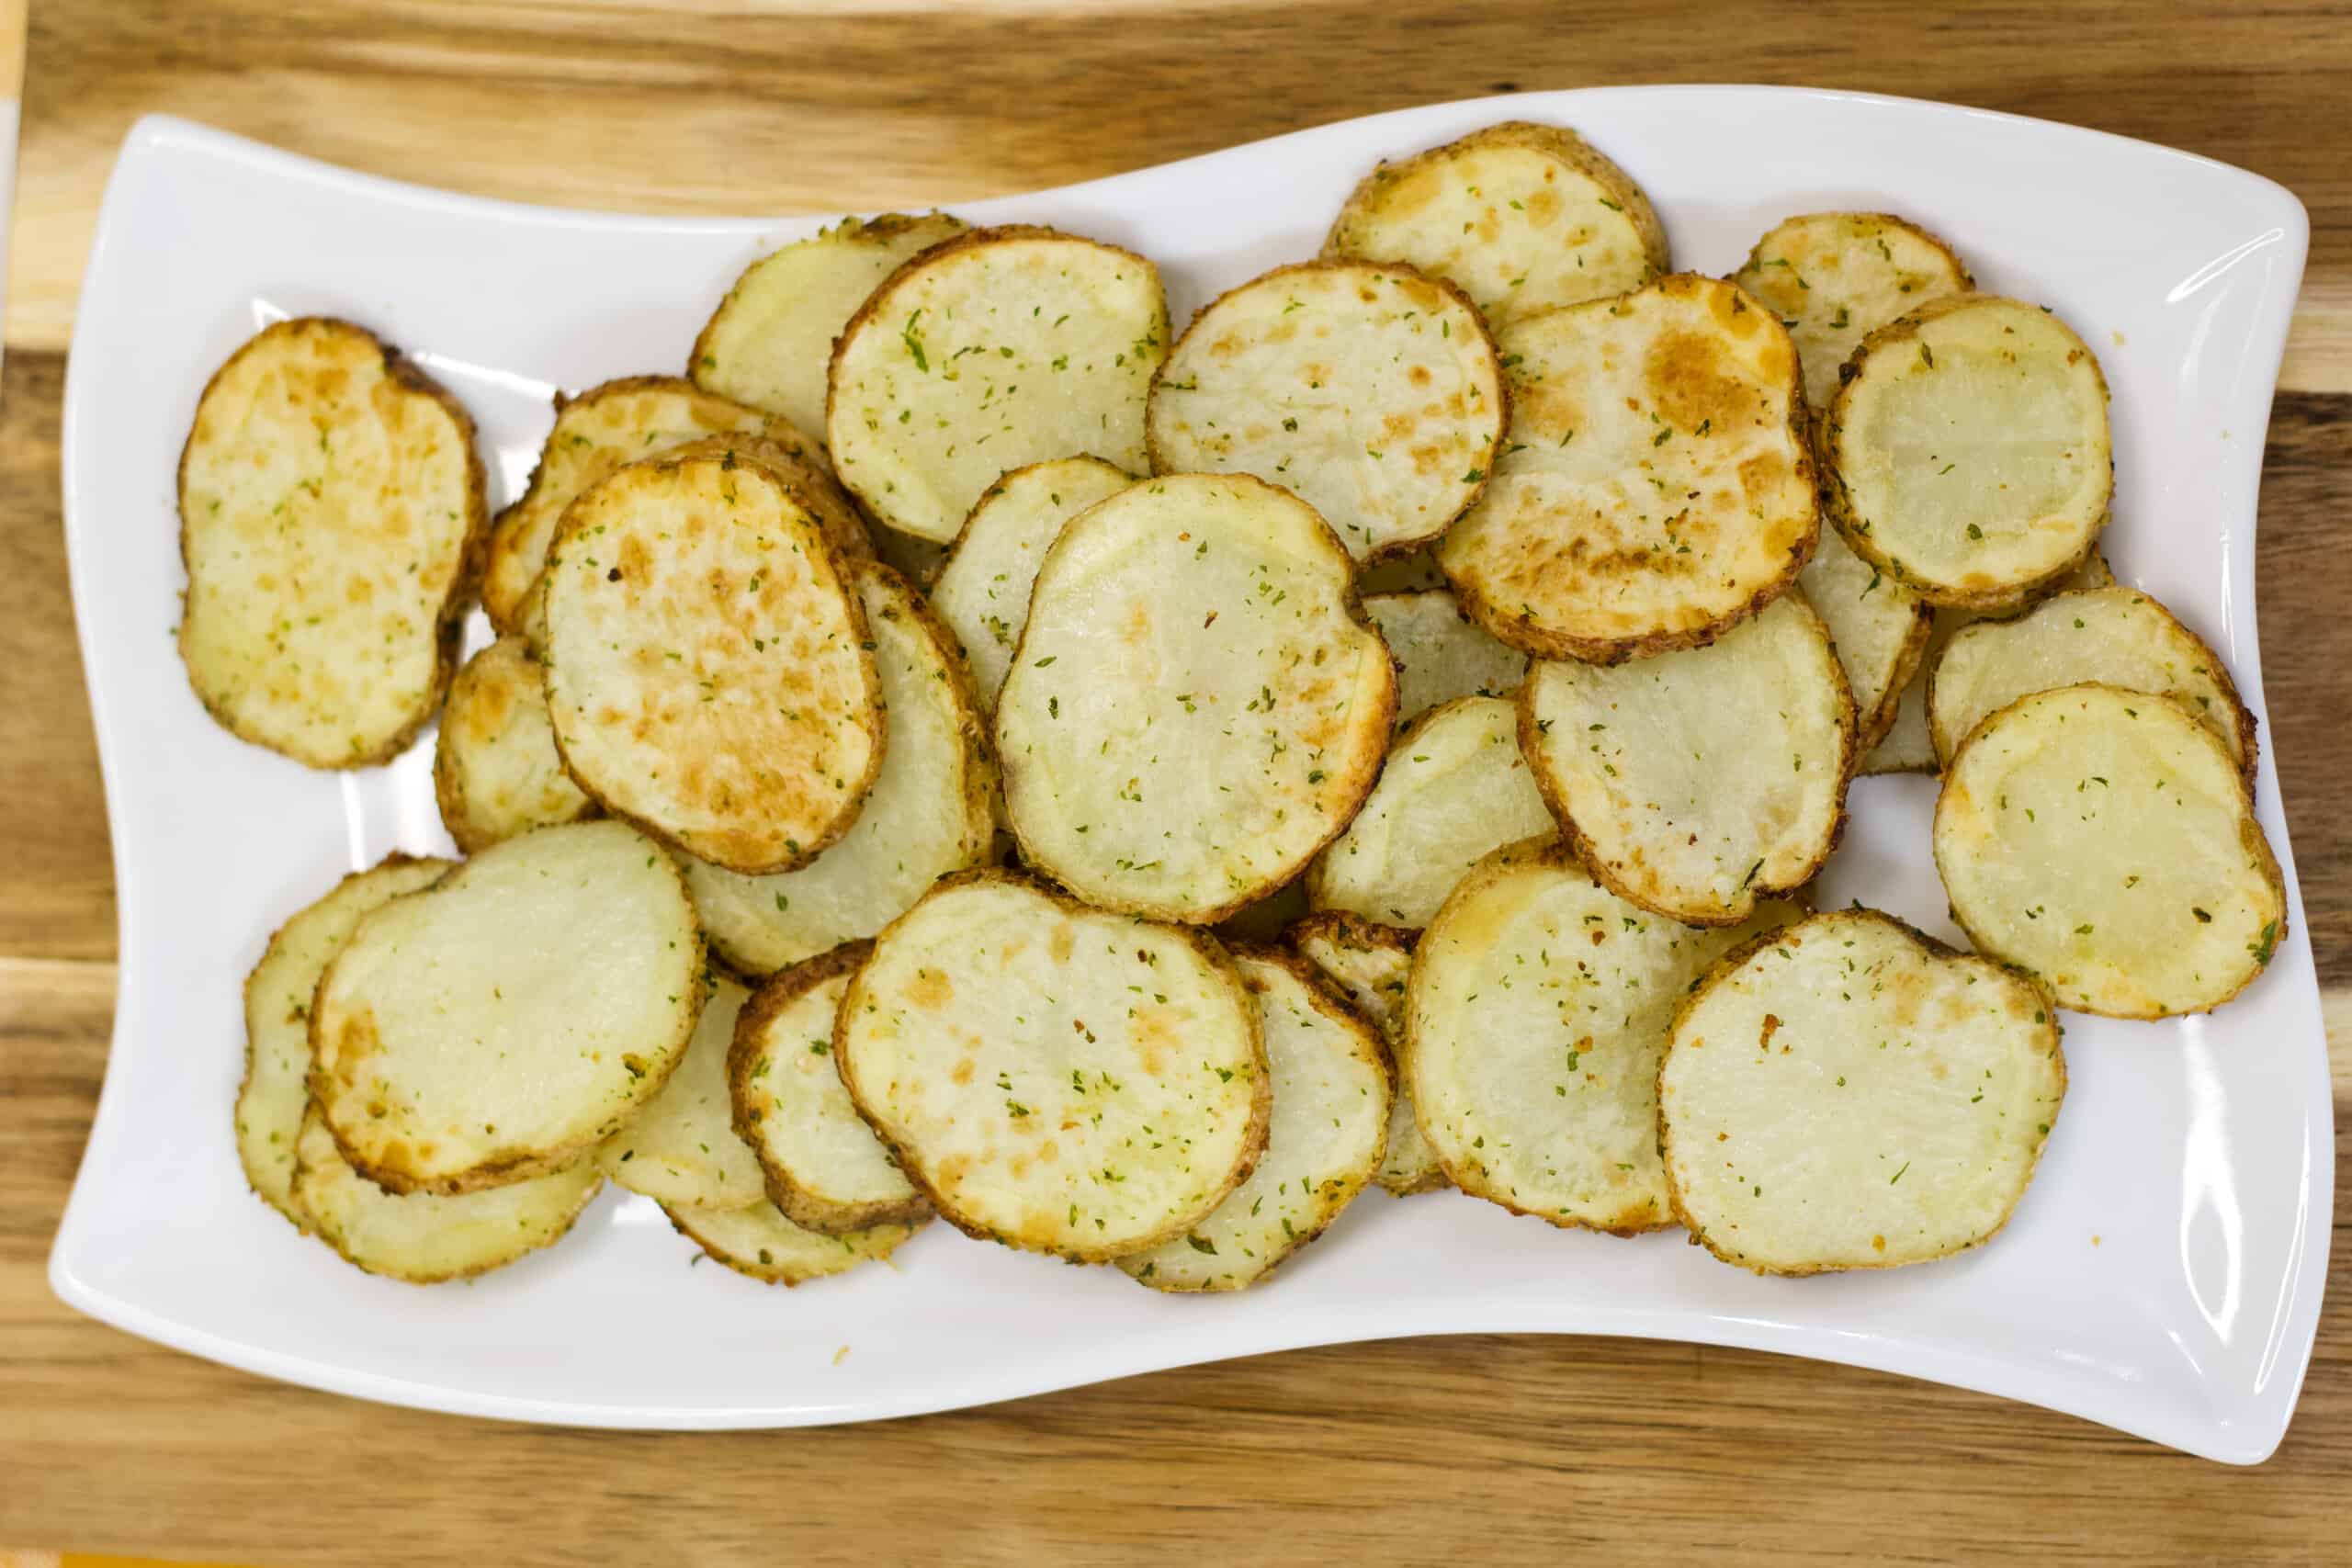 Horizontal image of the air fried potatoes on a white plate.